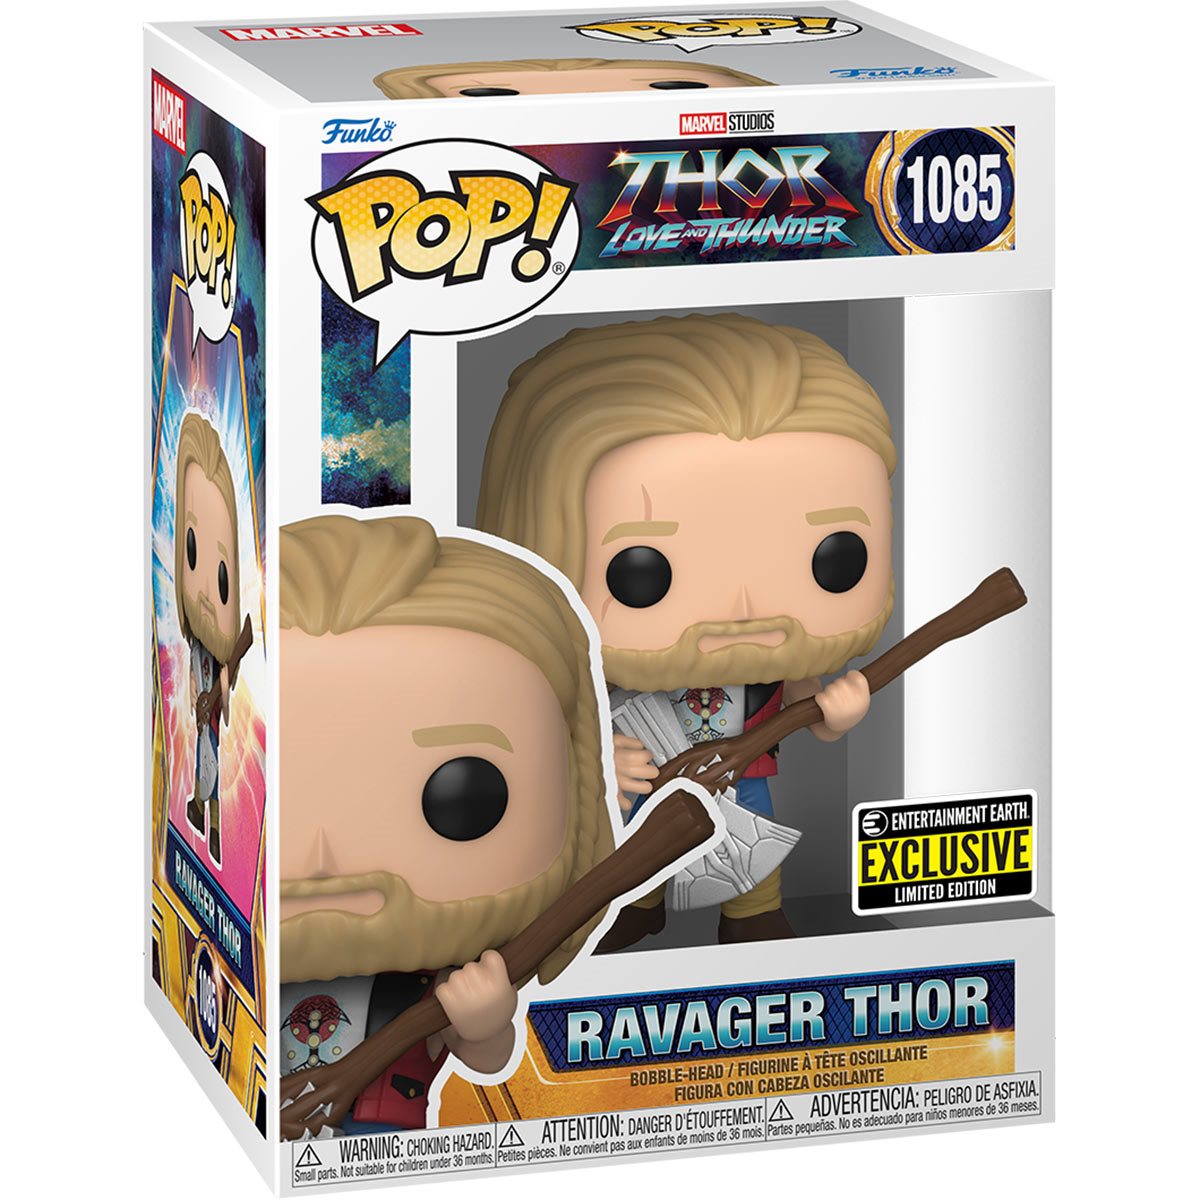 Thor: Love and Thunder Ravager Thor Pop! Vinyl Figure - EE Exclusive